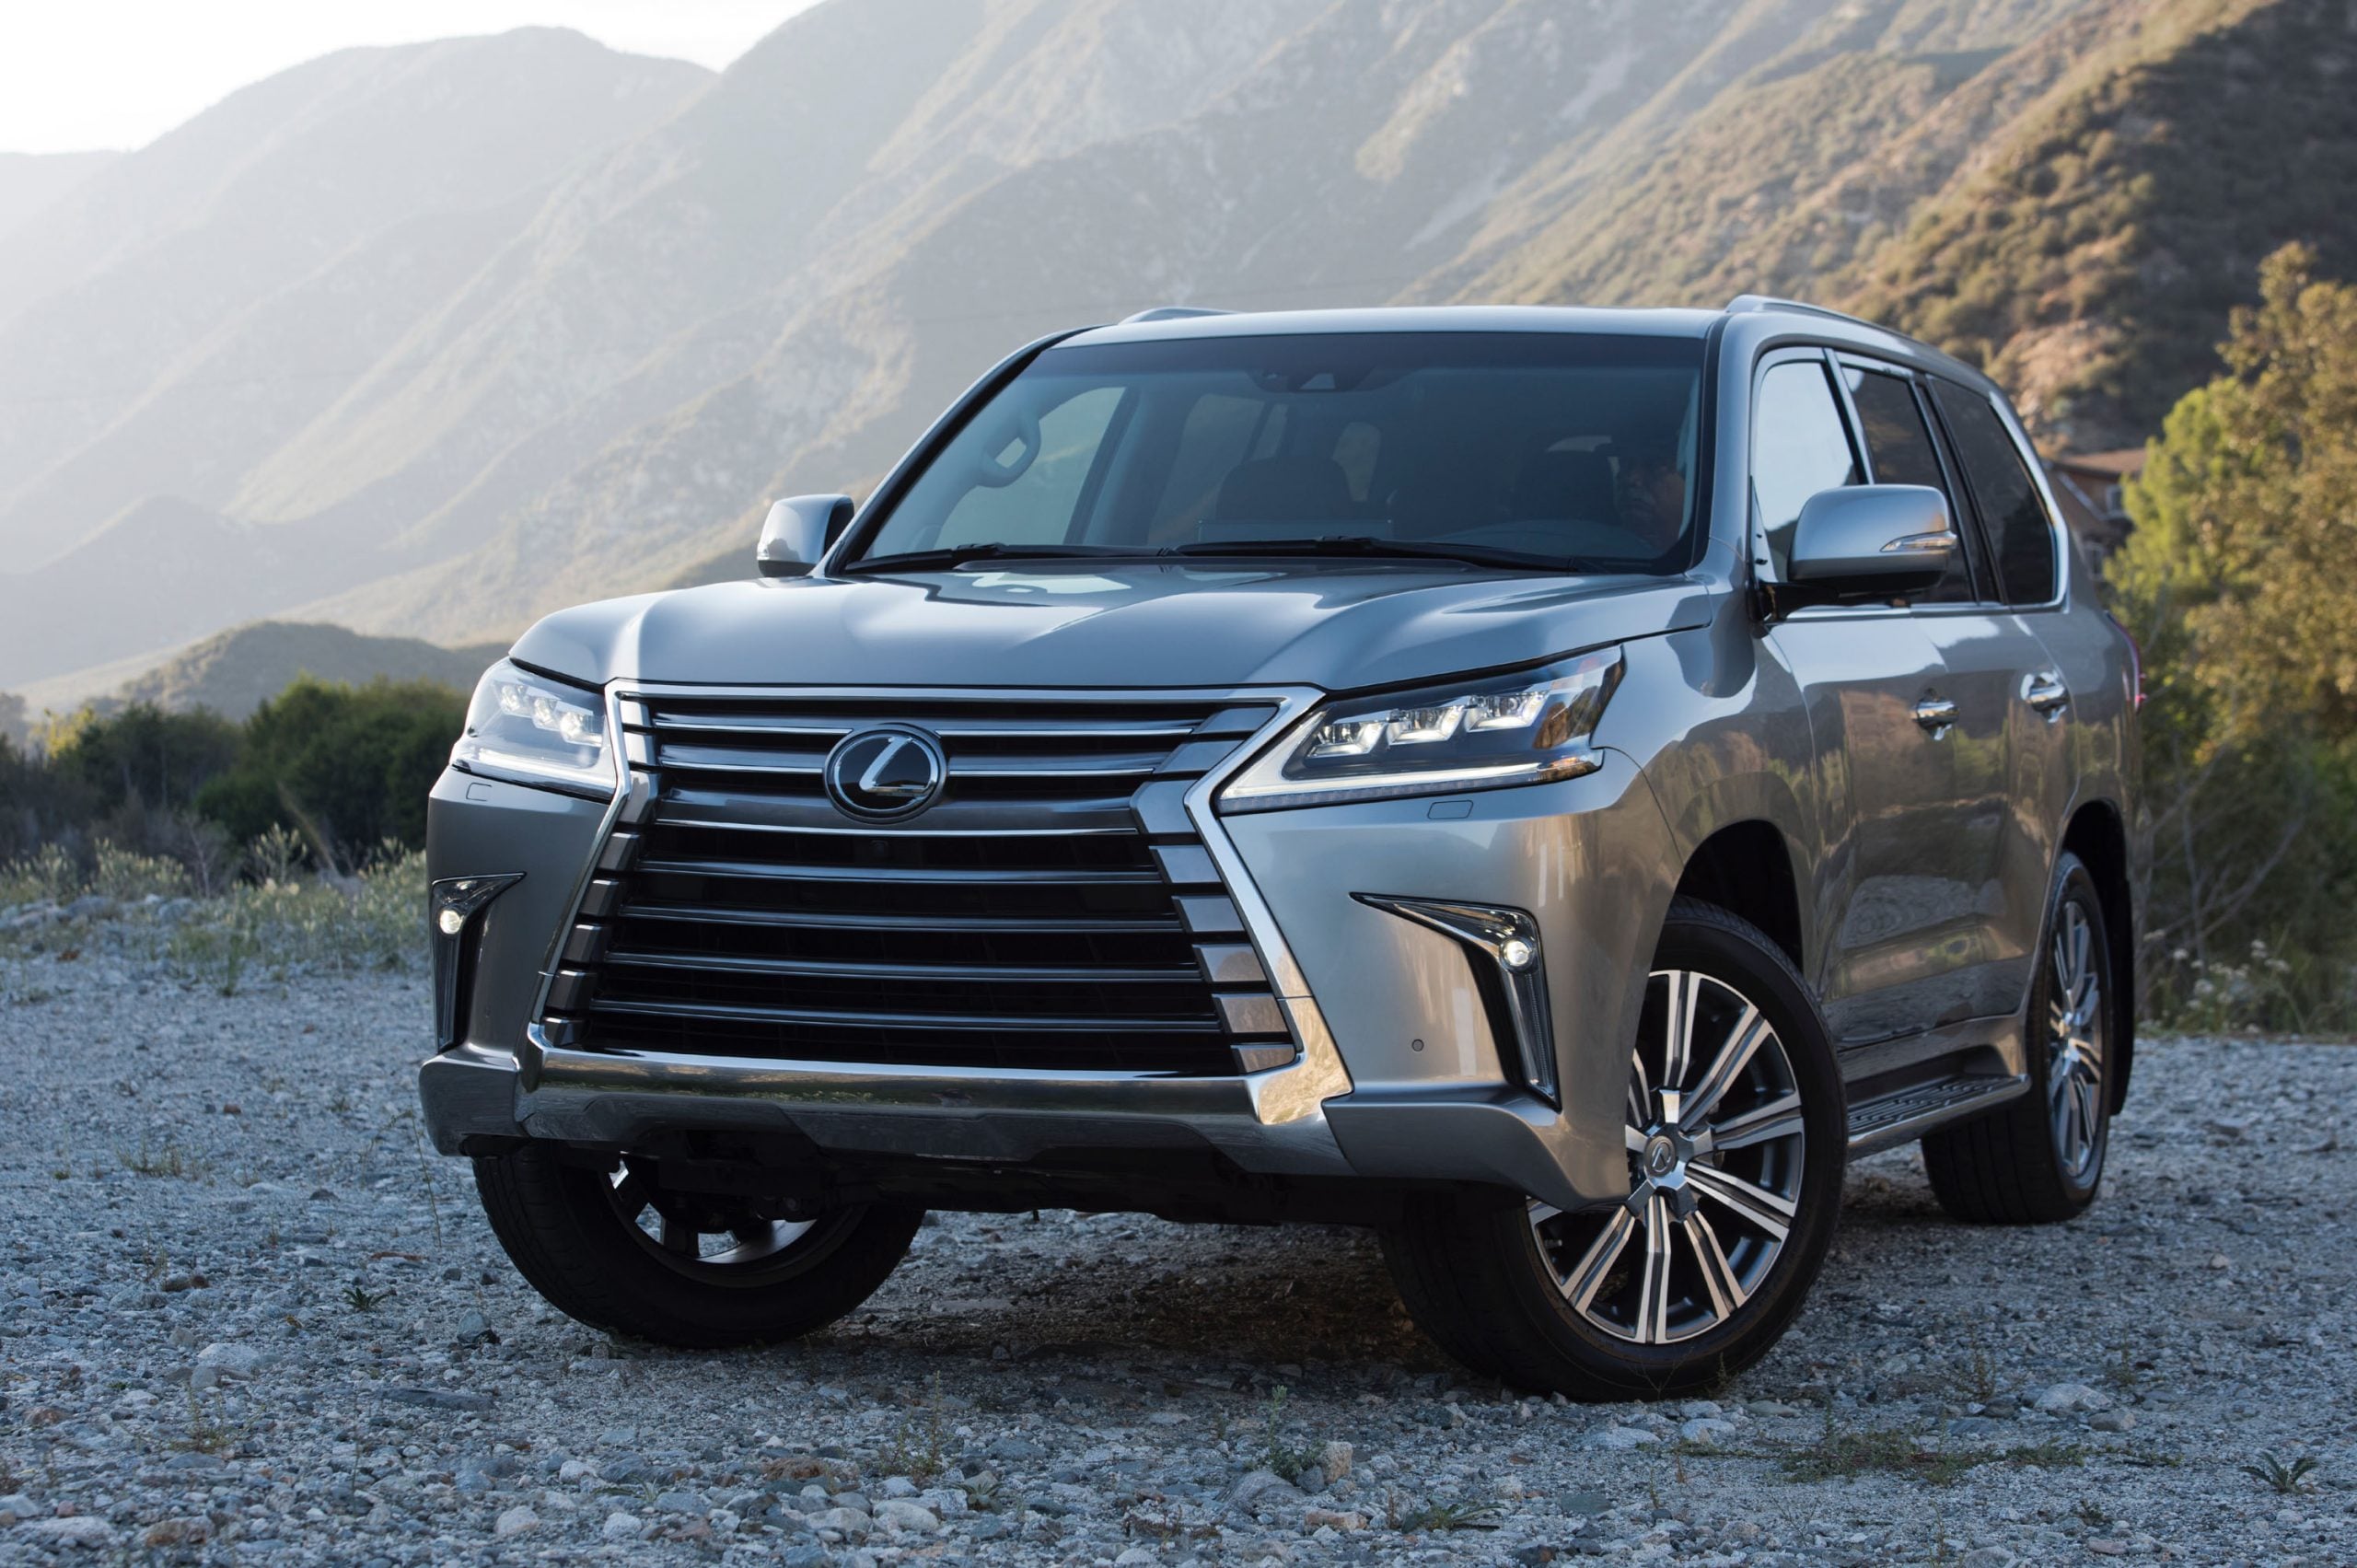 Impressive excess: The 2020 Lexus LX 570 review | The North State Journal